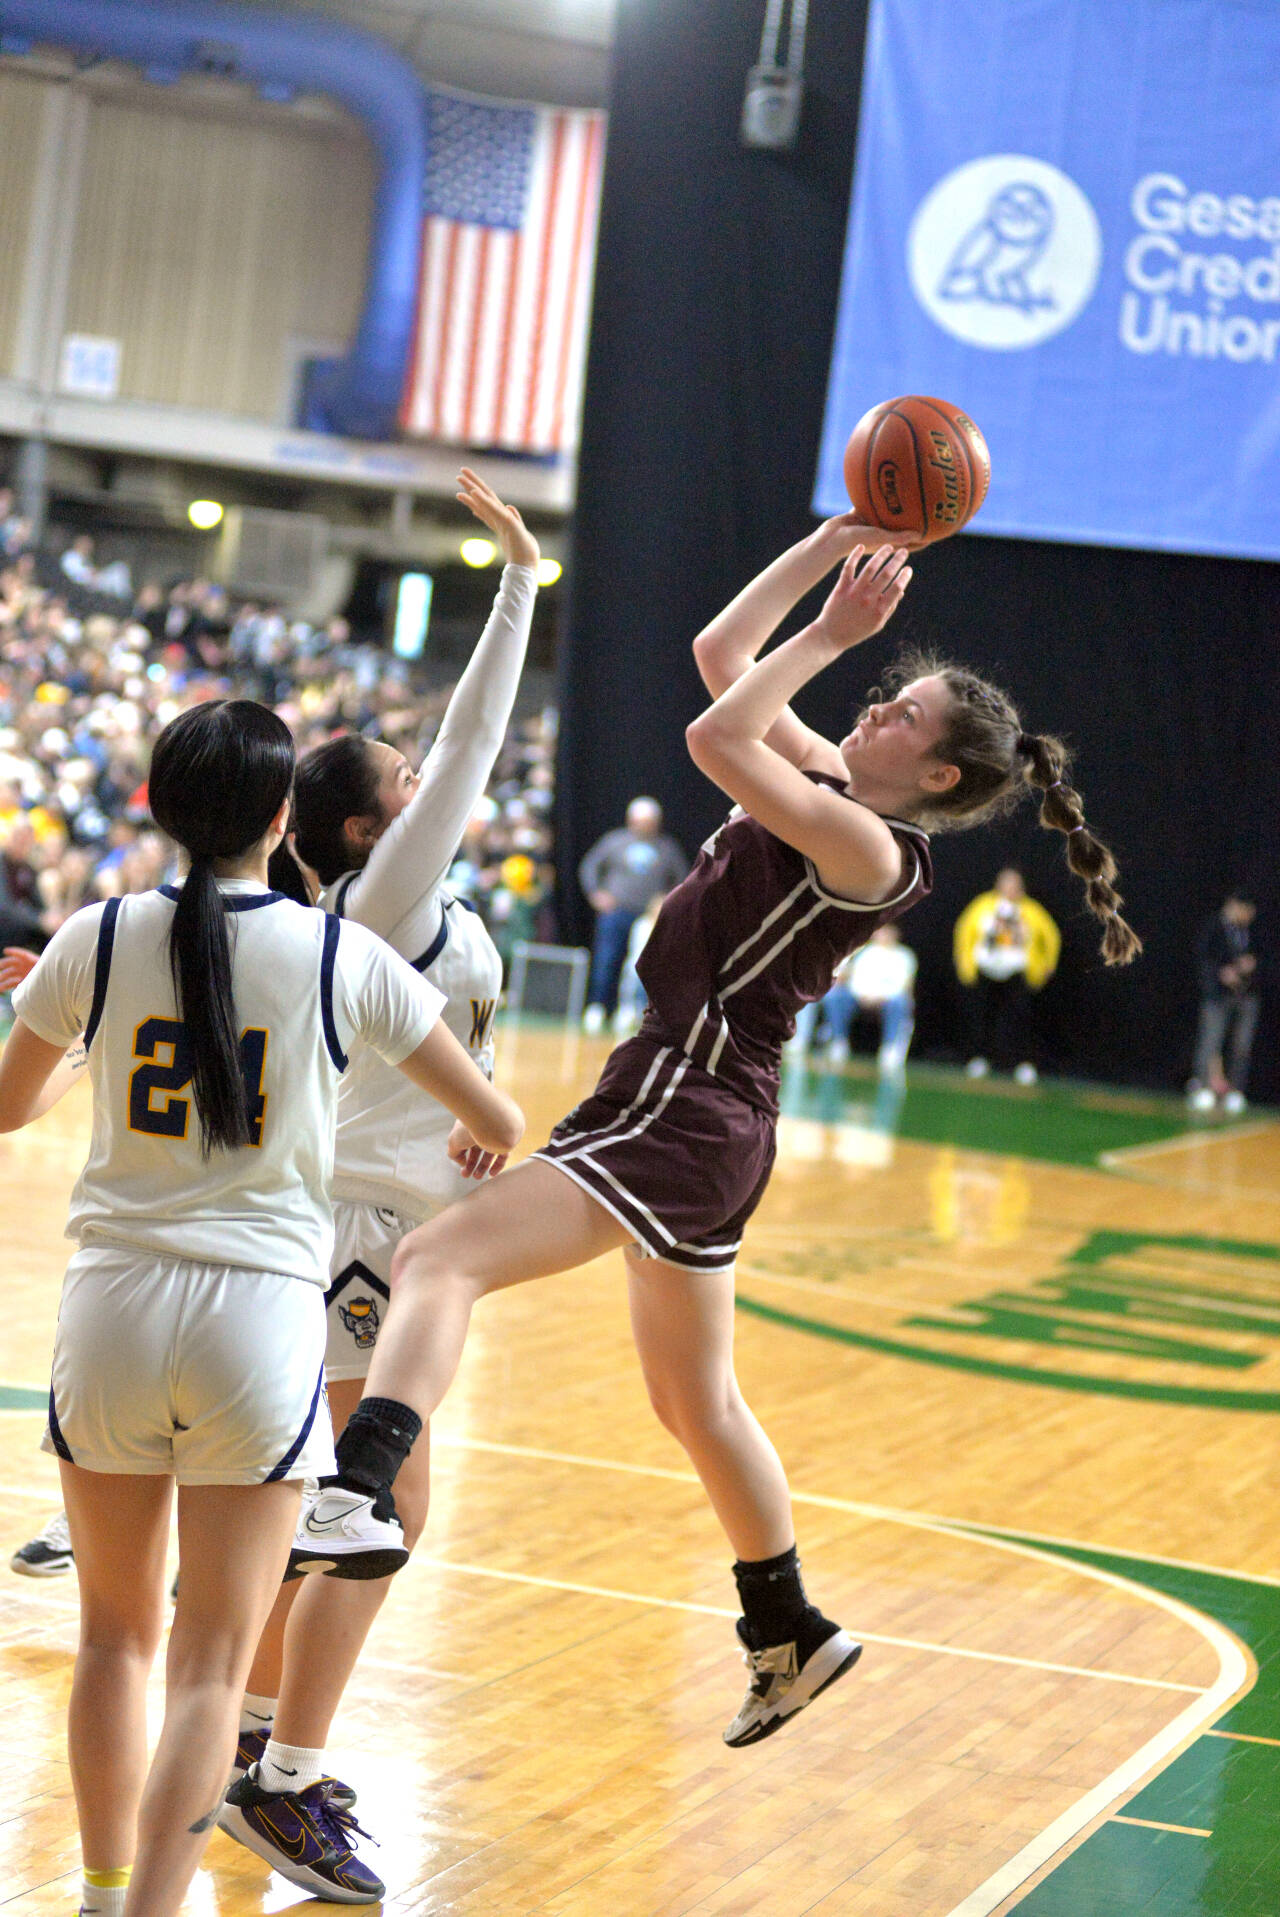 RYAN SPARKS / THE DAILY WORLD 
Montesano freshman Jillie Dalan, right, puts up a shot during the Bulldogs’ 64-36 loss to Wapato in a 1A State quarterfinal game on Thursday at the Yakima Valley SunDome.